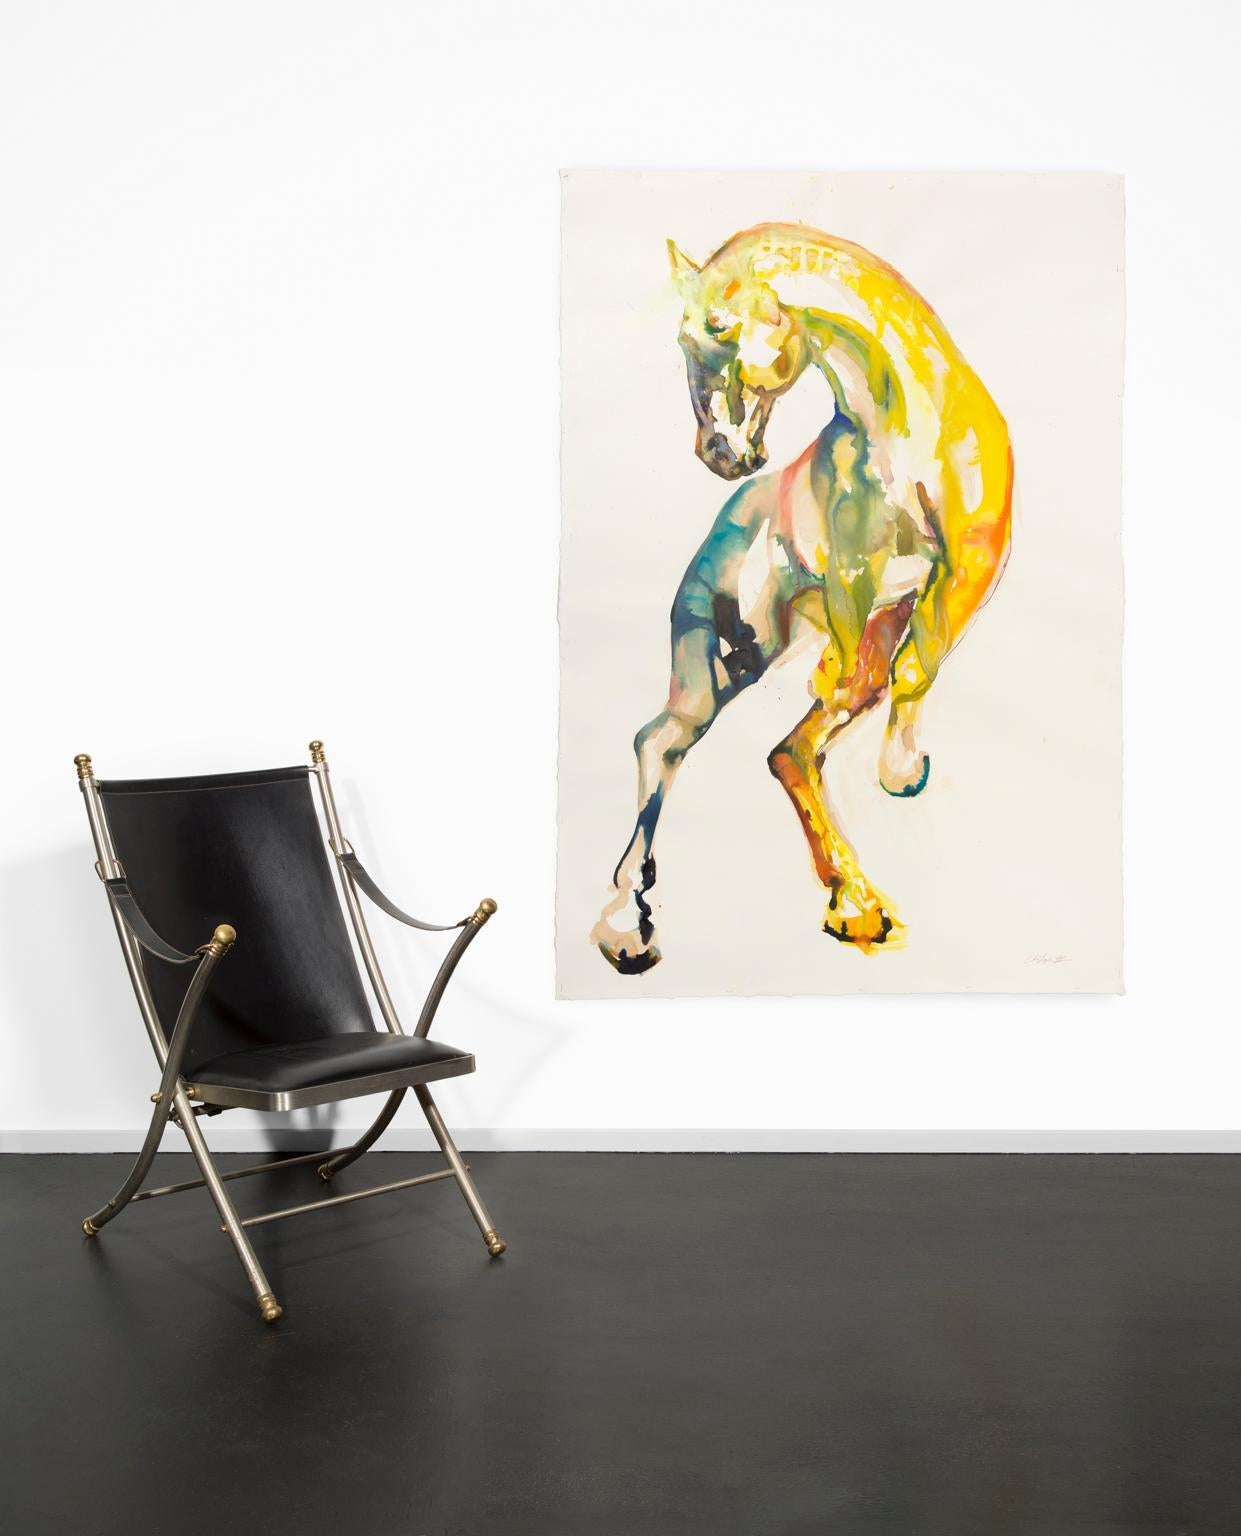 This large mixed medium painting in india ink and wine on heavyweight deckle BFK print paper depicts a yellow horse in motion, awash in a rainbow of vibrant colors. In keeping with the artist's themes of connecting the body with its animal nature,